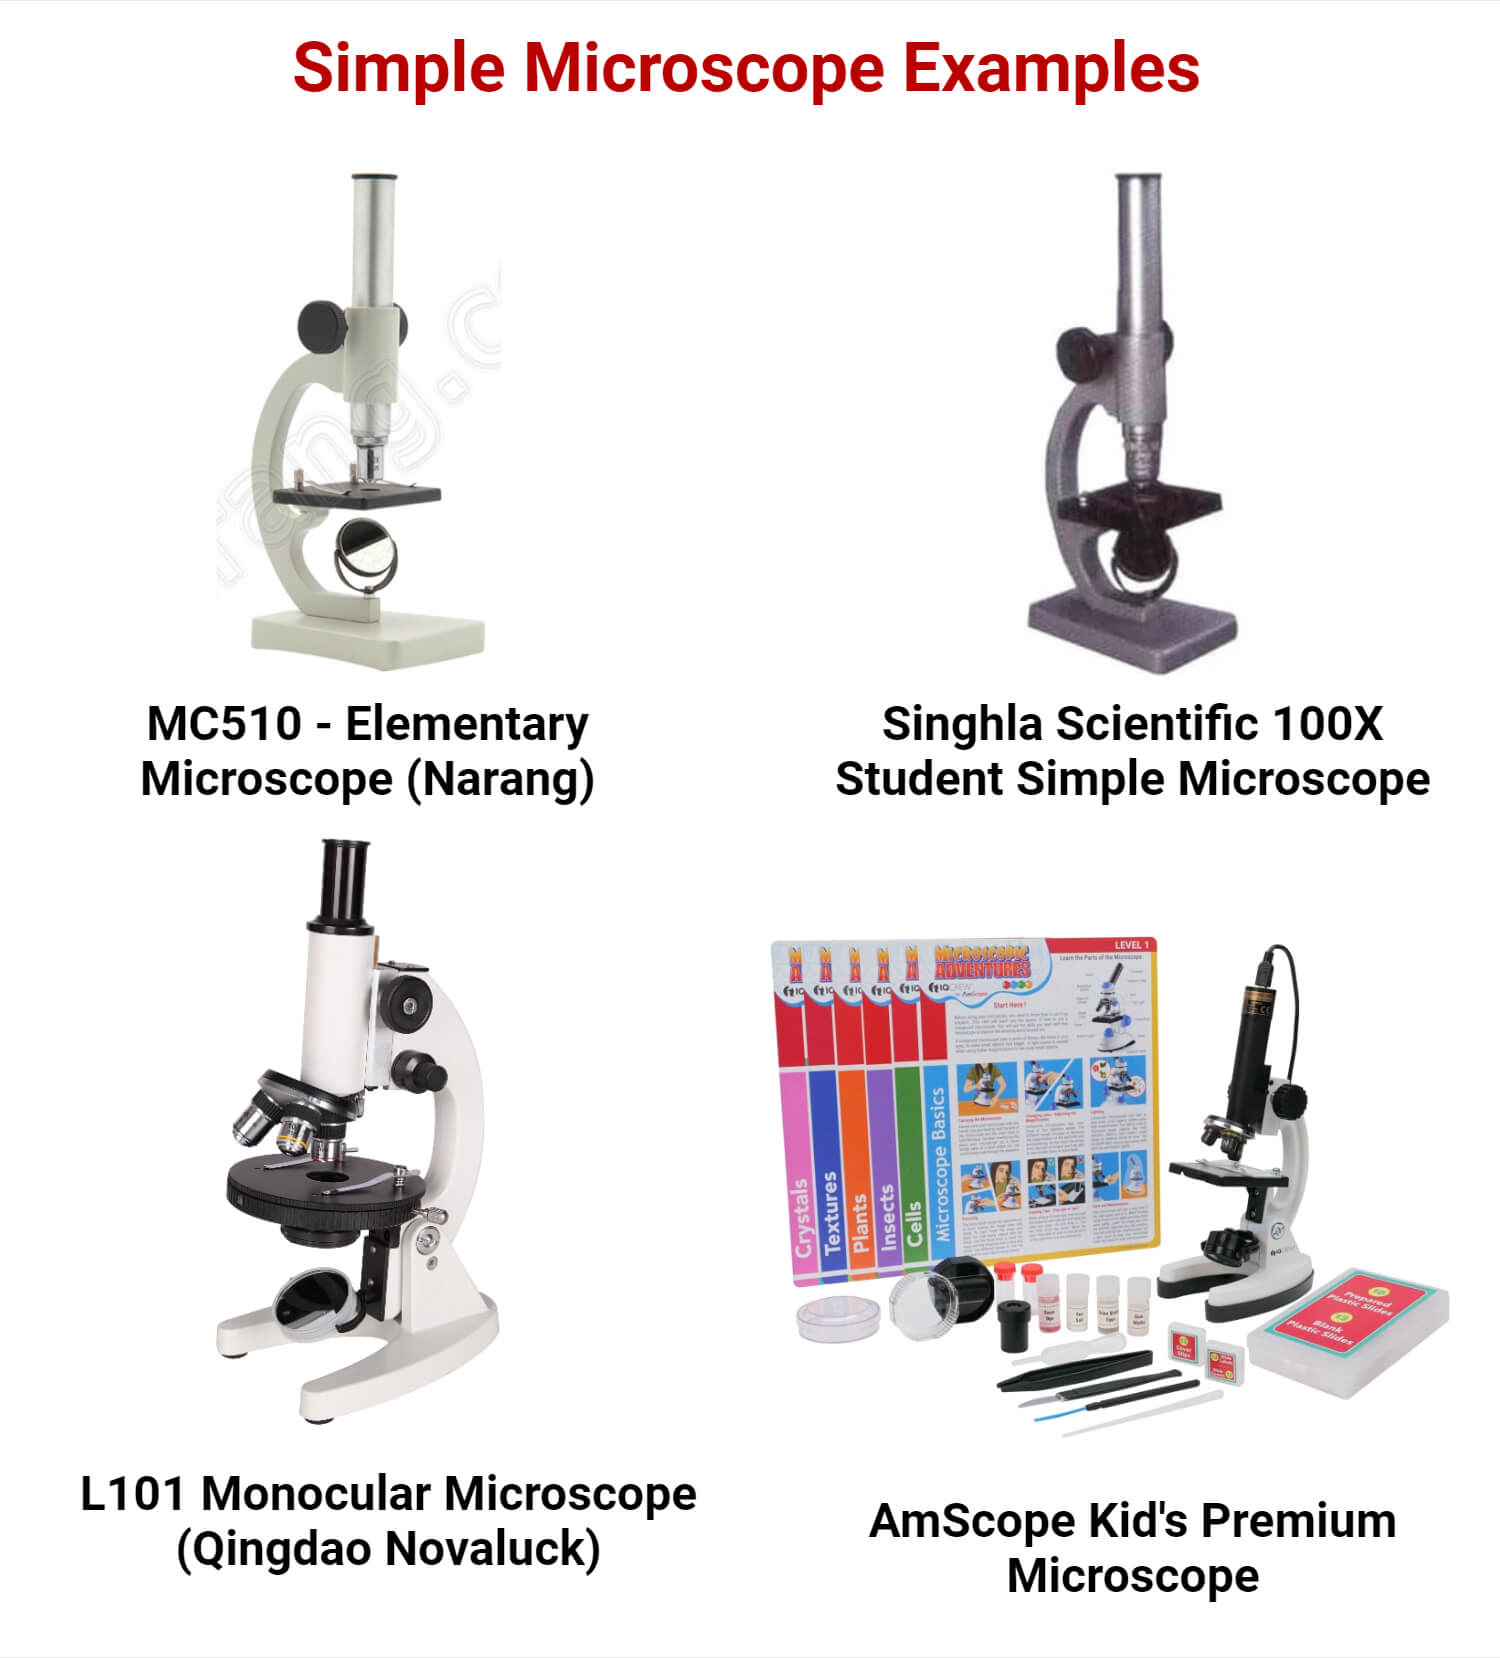 Examples of Simple Microscope